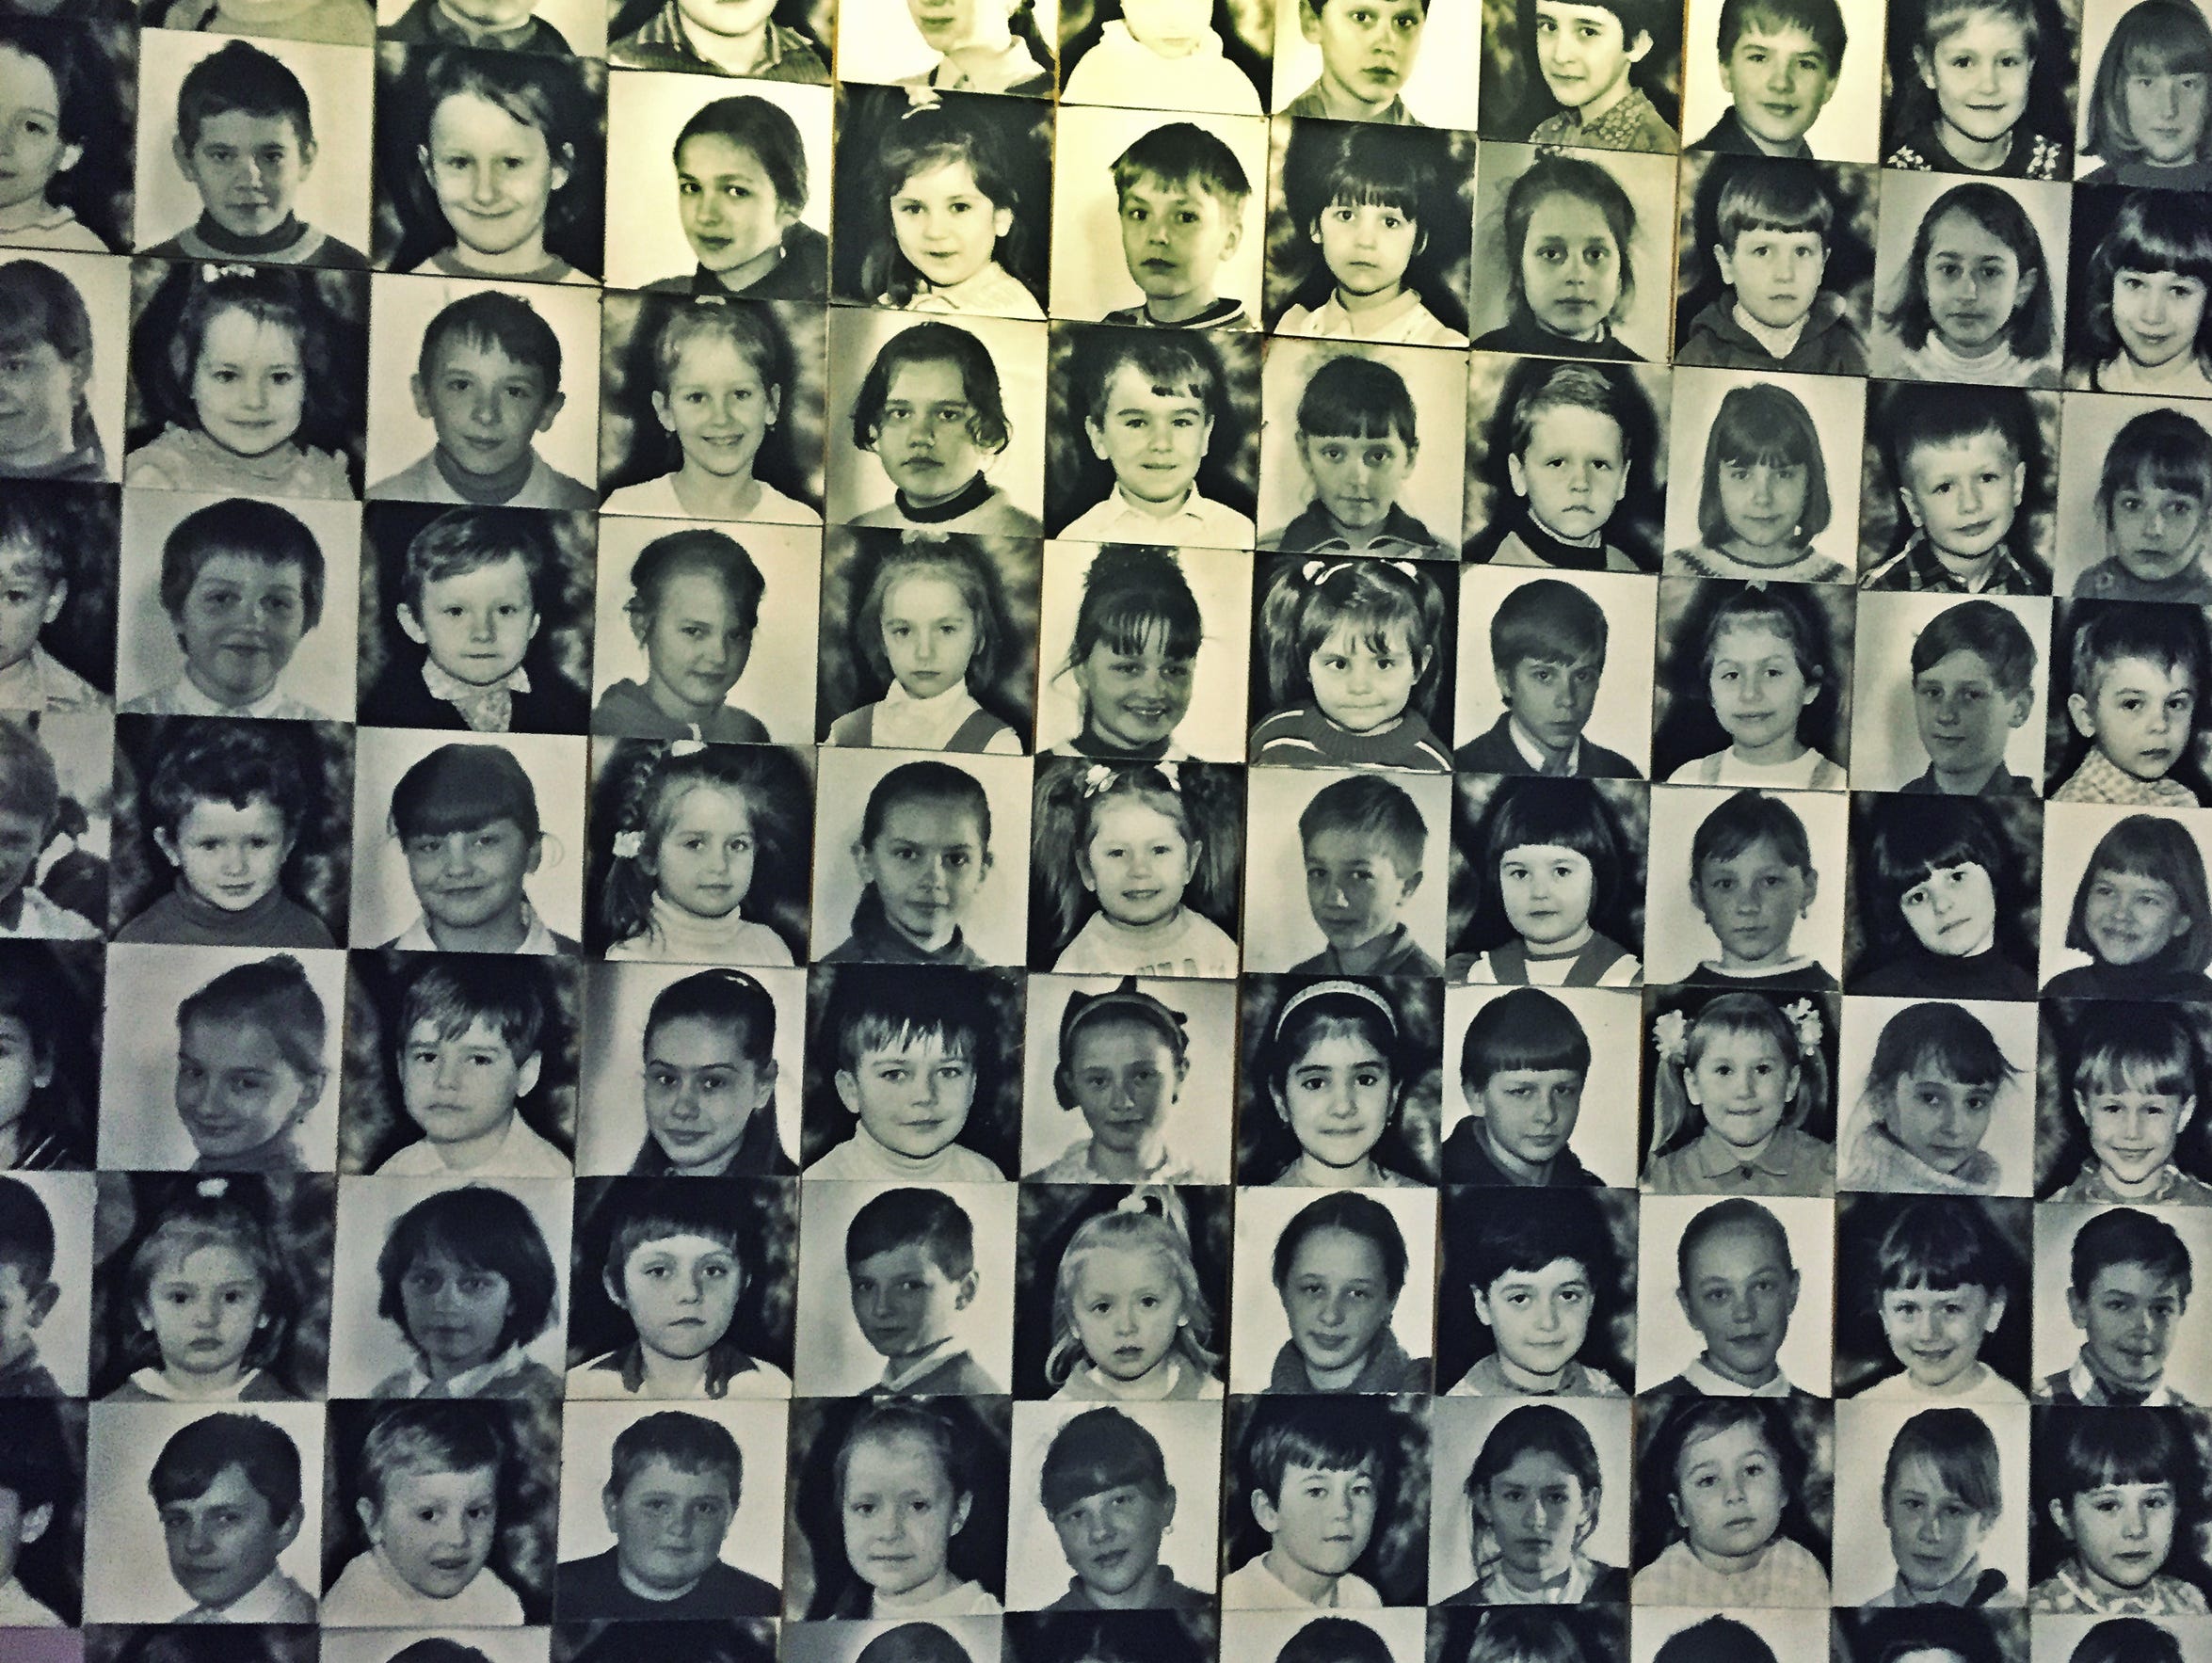 Some of the children who died in the nuclear accident.